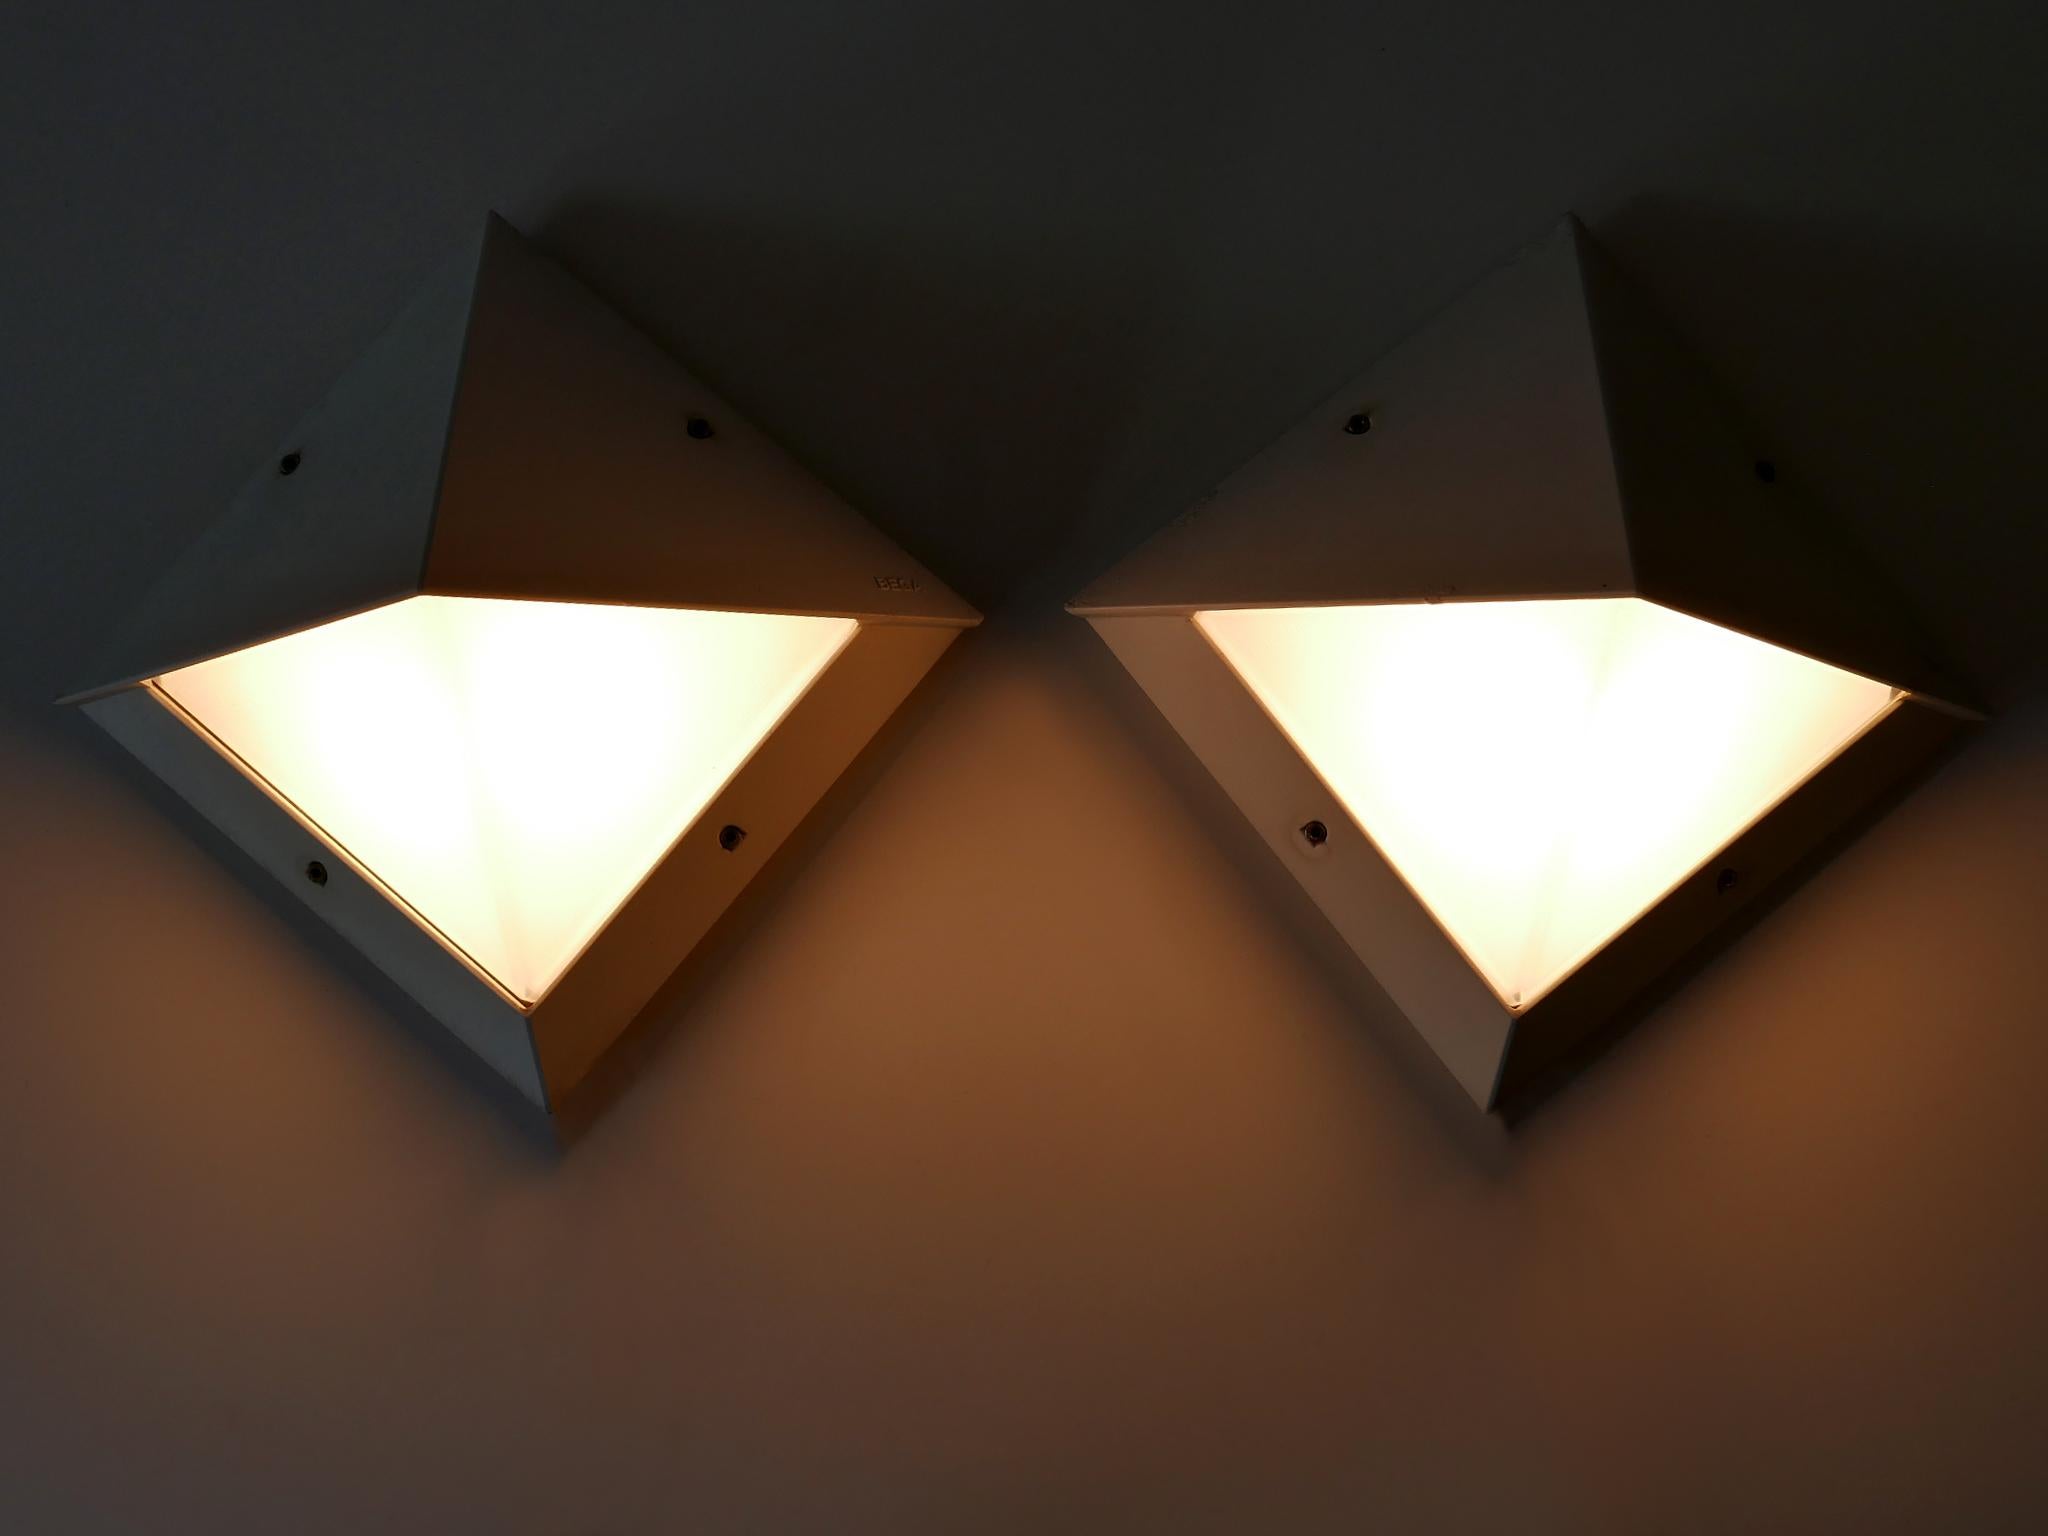 Set of two elegant modernist outdoor wall lamps or sconces. Designed & manufactured by BEGA, Germany, 1980s.

Executed in white enameled cast aluminium and glass, each lamp needs 1 x E27 / E26 Edison screw fit bulb, is wired and in working